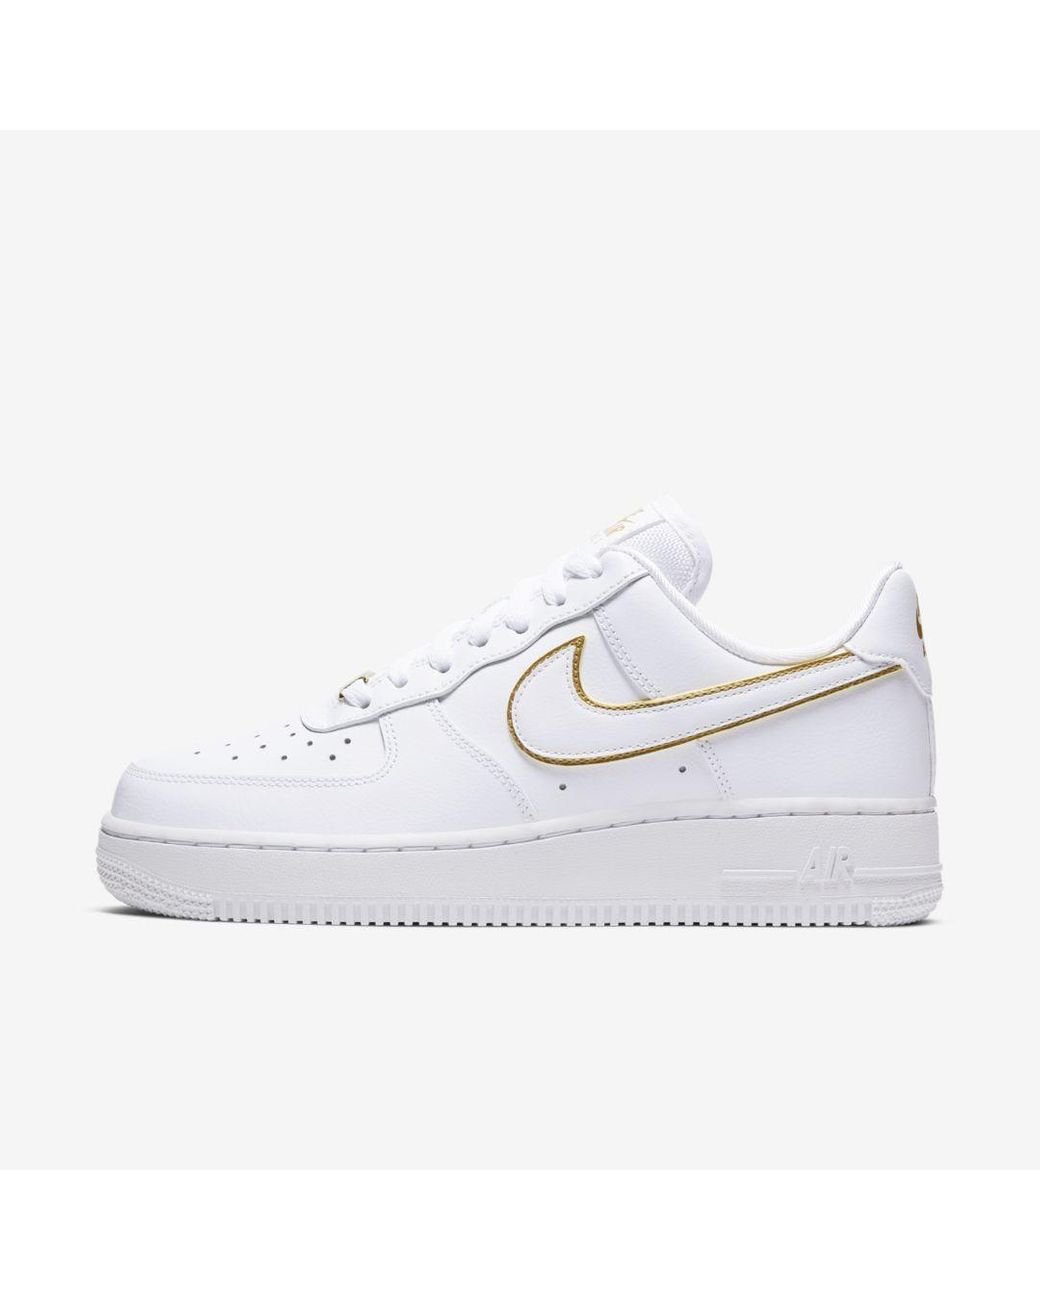 Nike Air Force 1 '07 Essential Shoes in White | Lyst